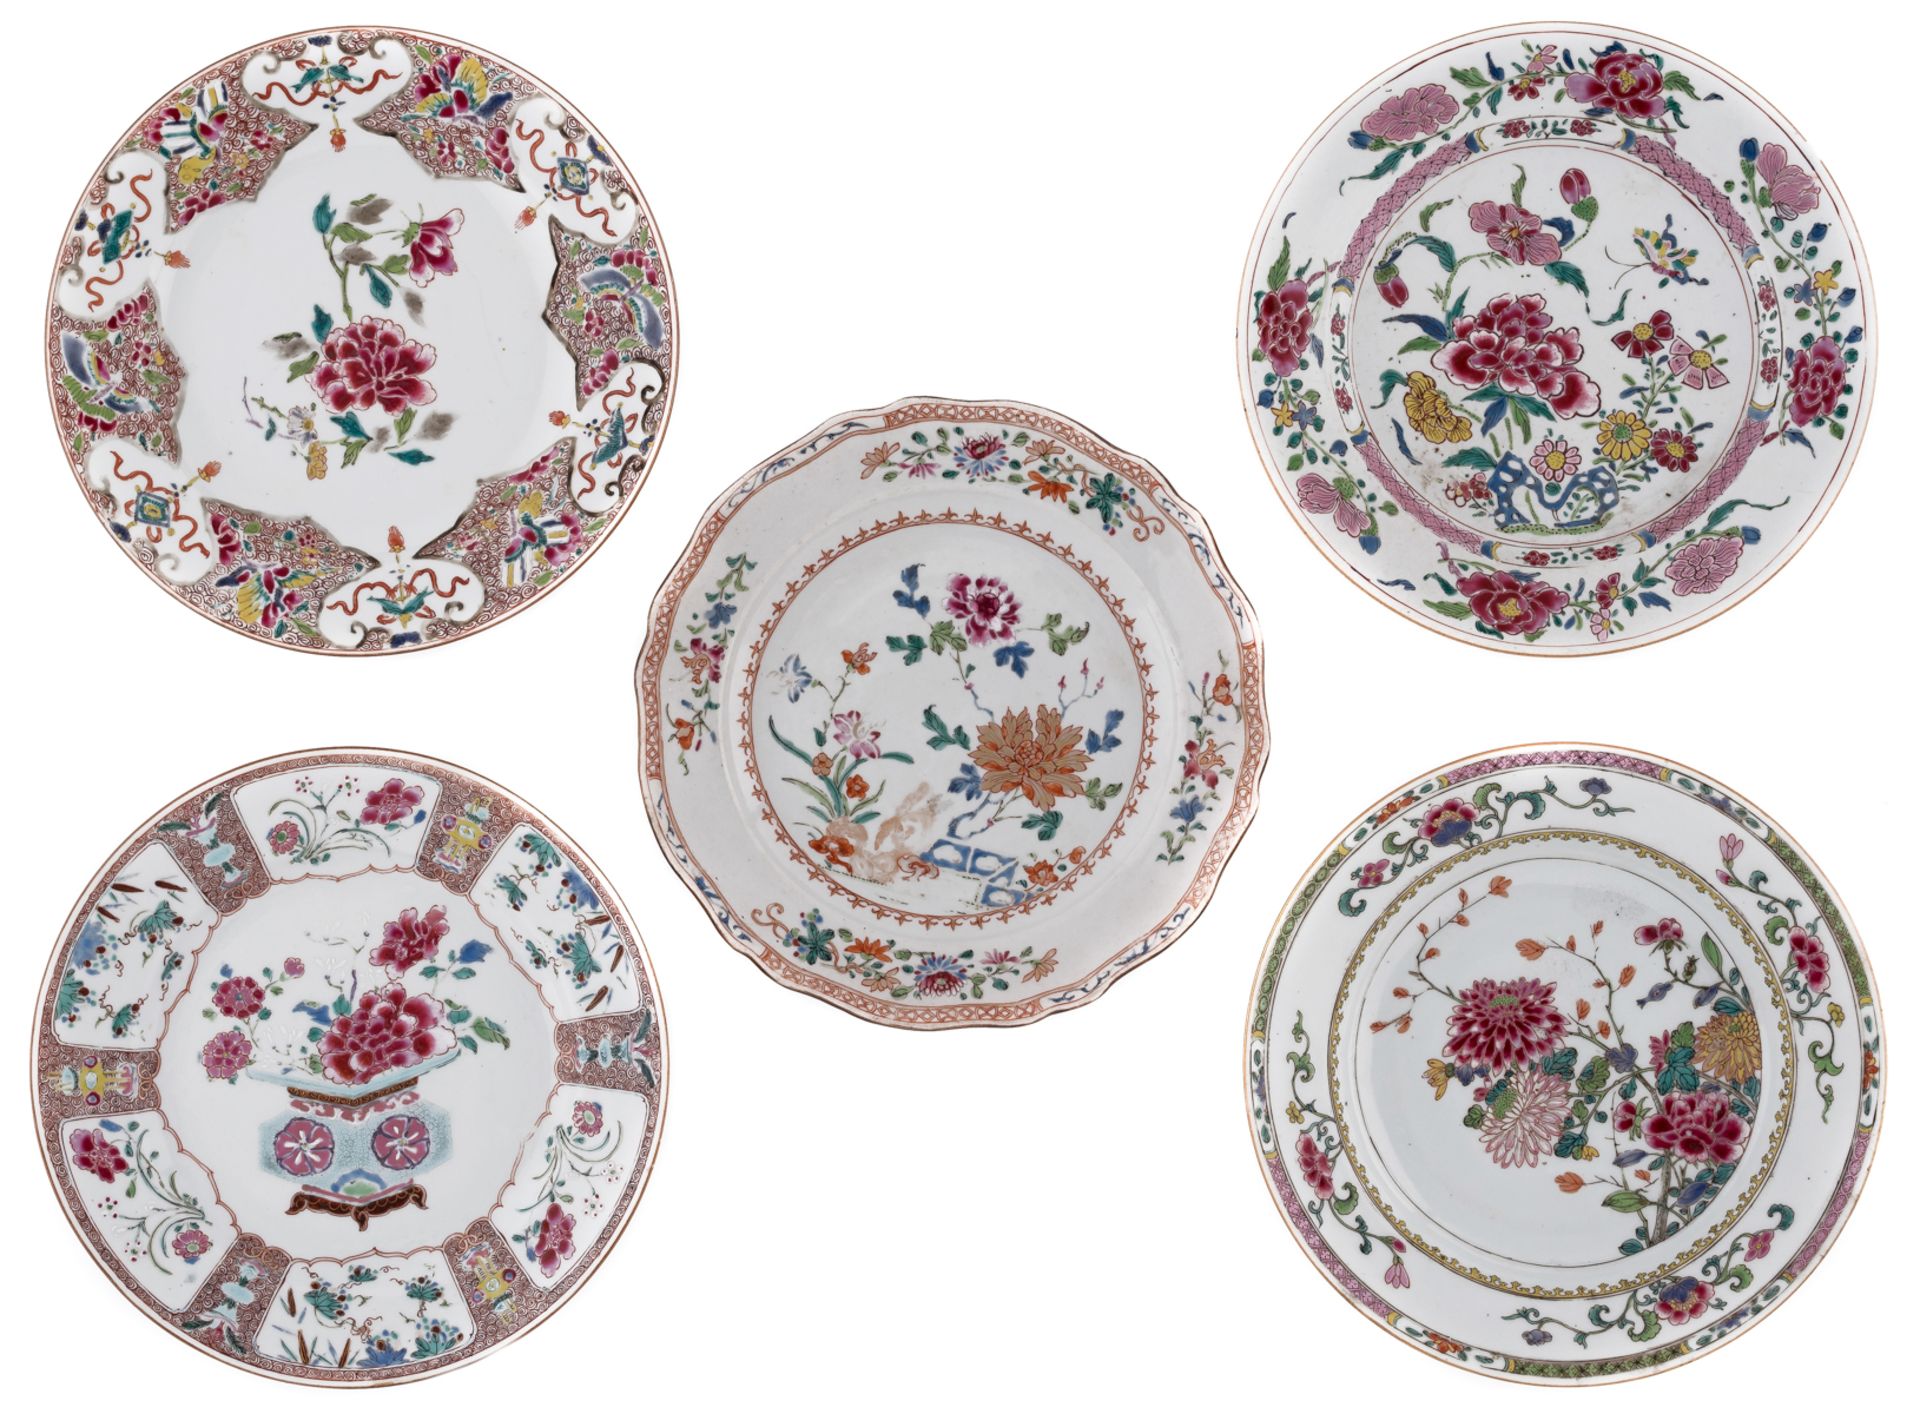 Five Chinese famille rose floral decorated dishes, 18thC, ø 22,5 - 23 cm